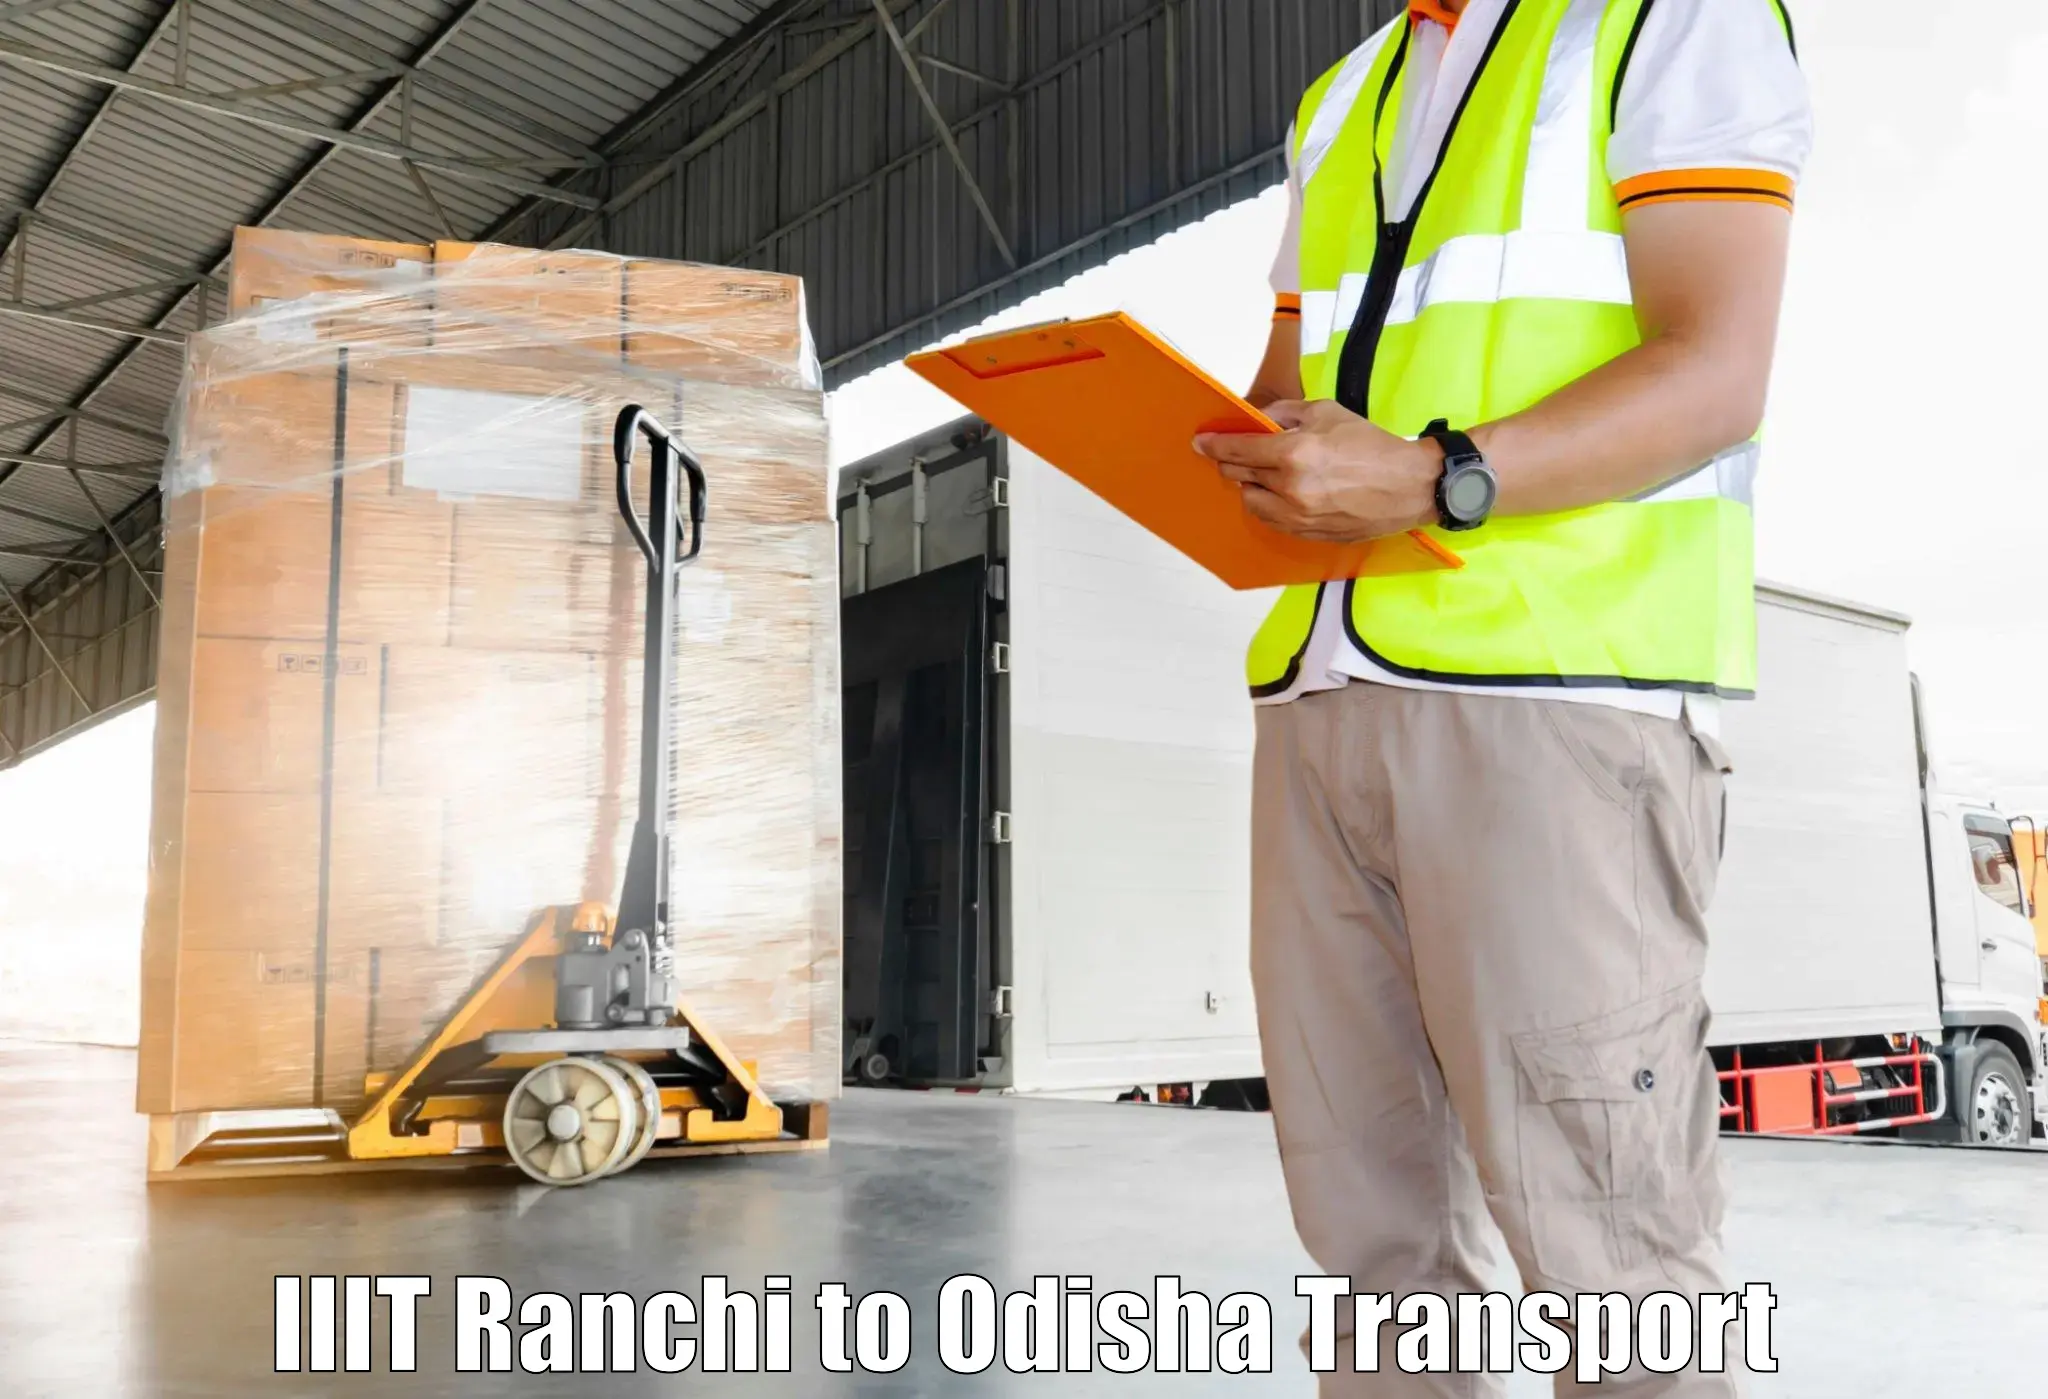 Transport shared services IIIT Ranchi to Betnoti